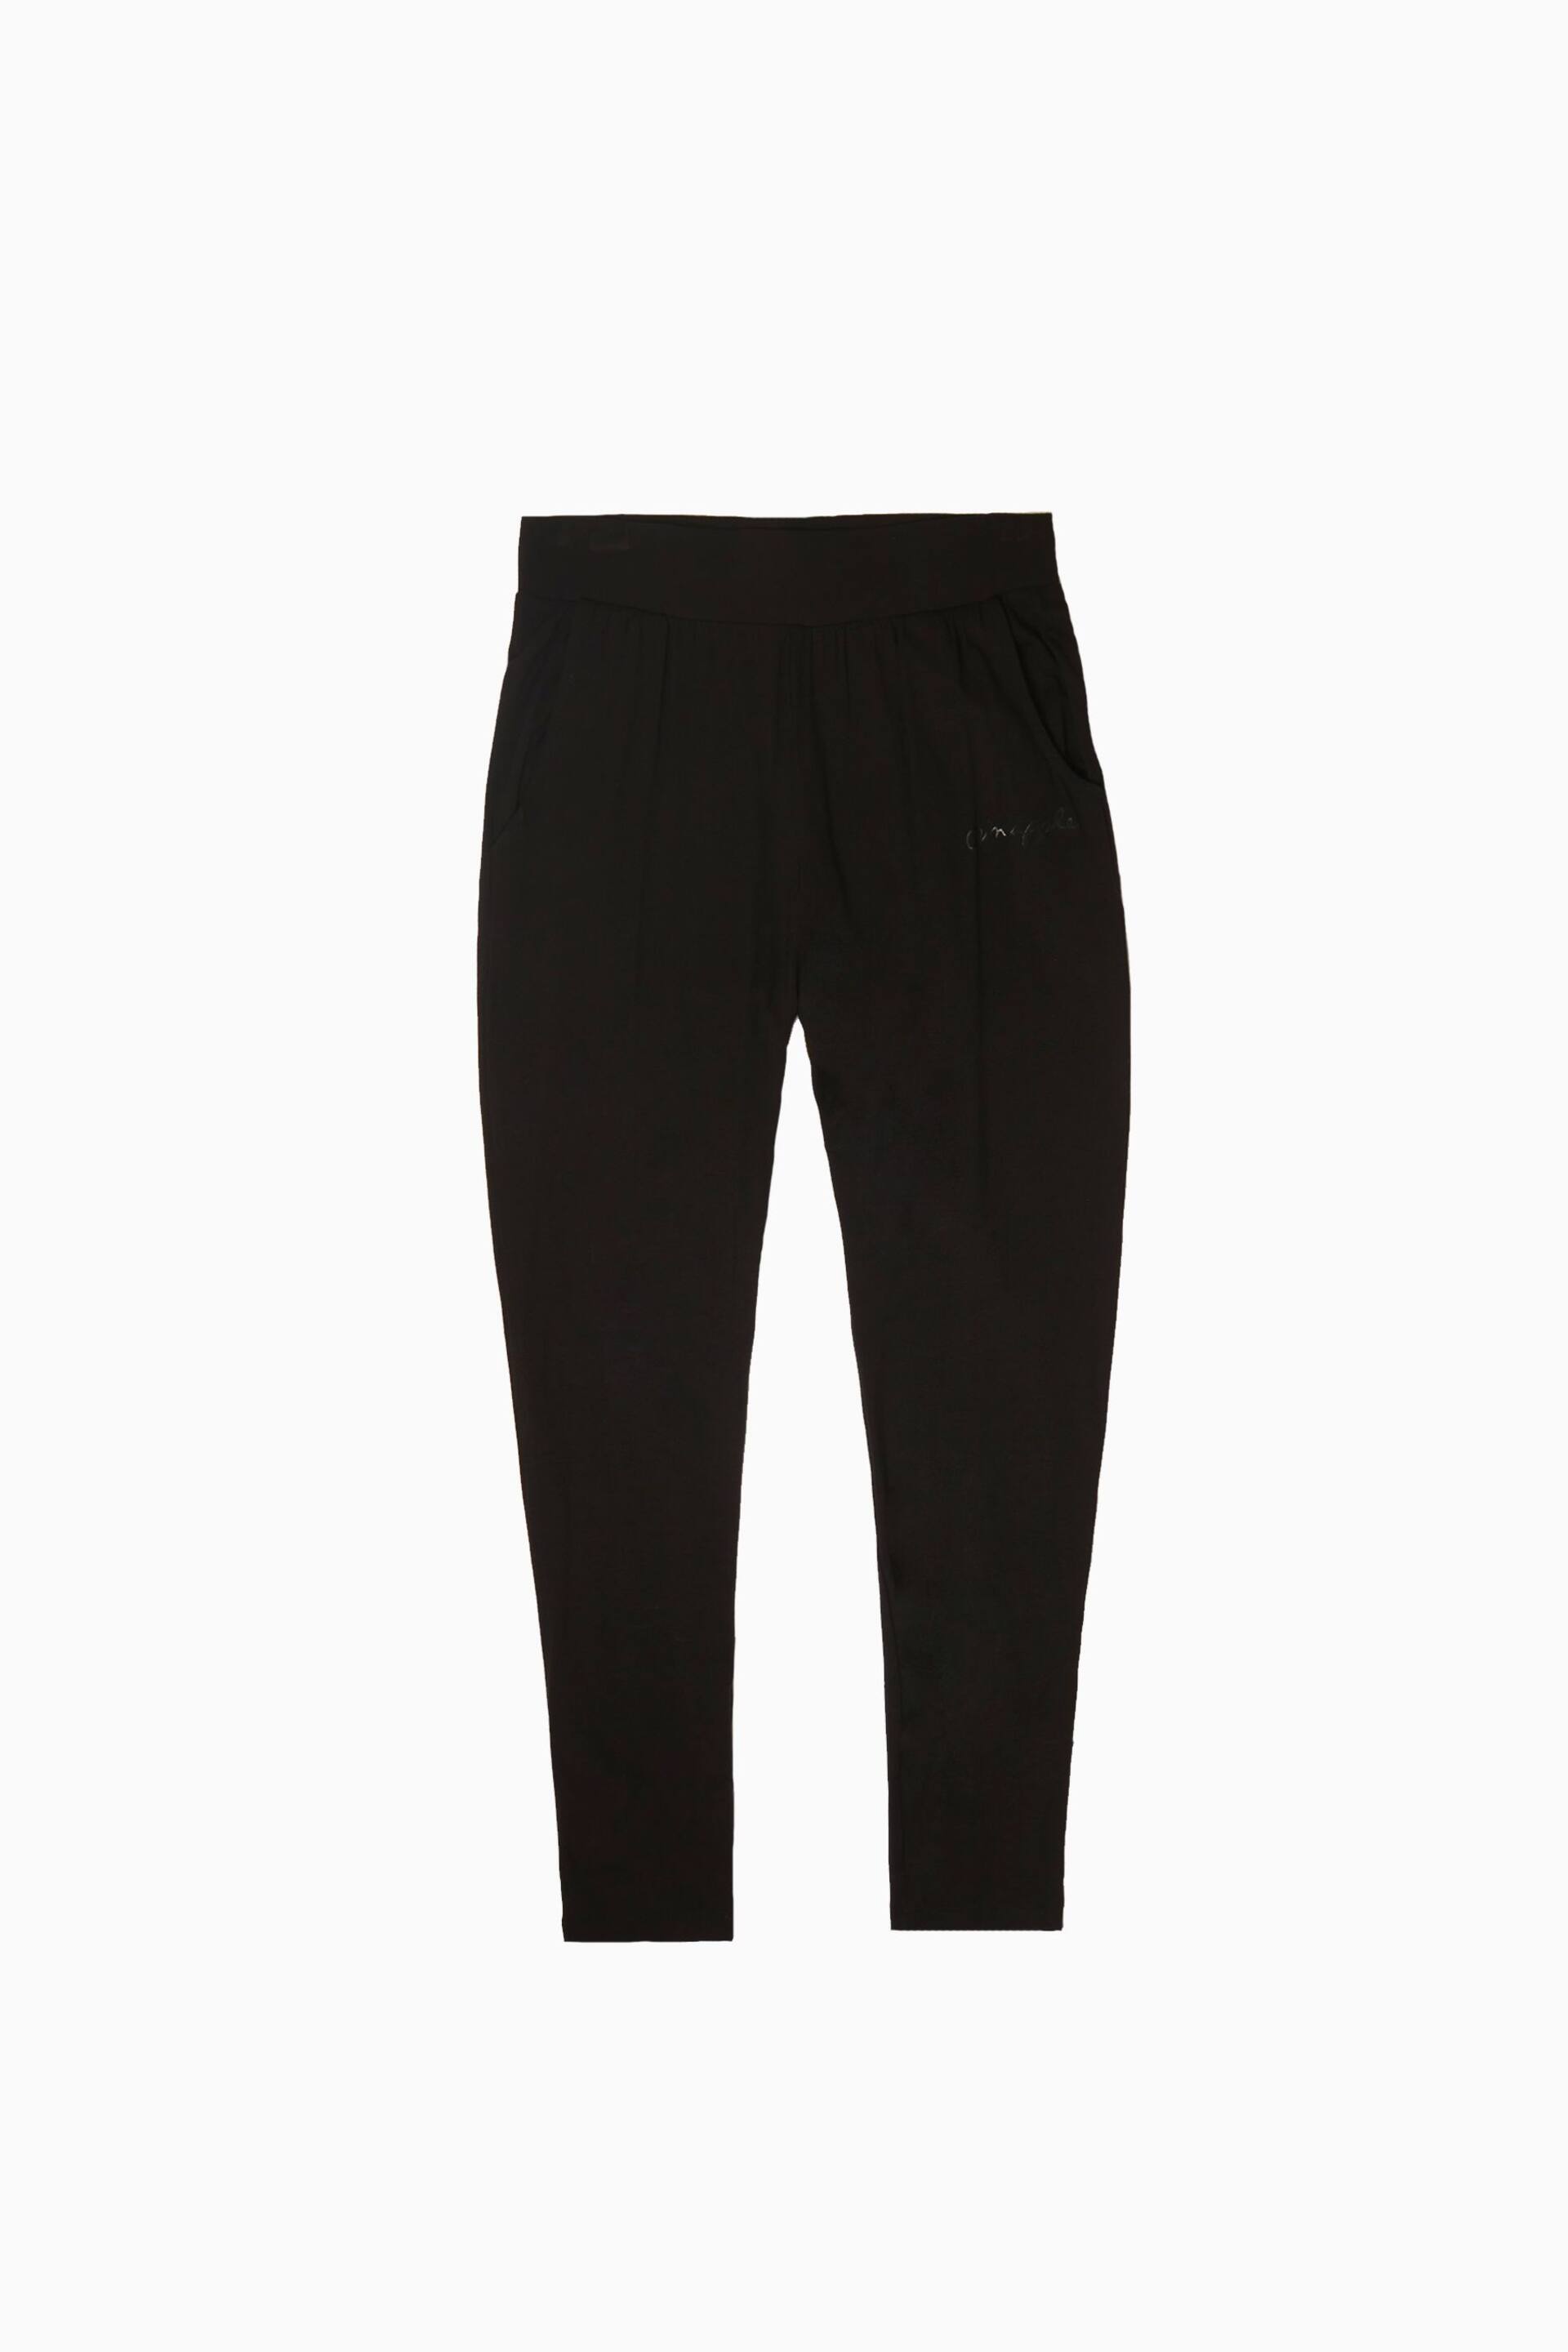 Pineapple Black Viscose Relaxed Fit Jersey Joggers - Image 5 of 5